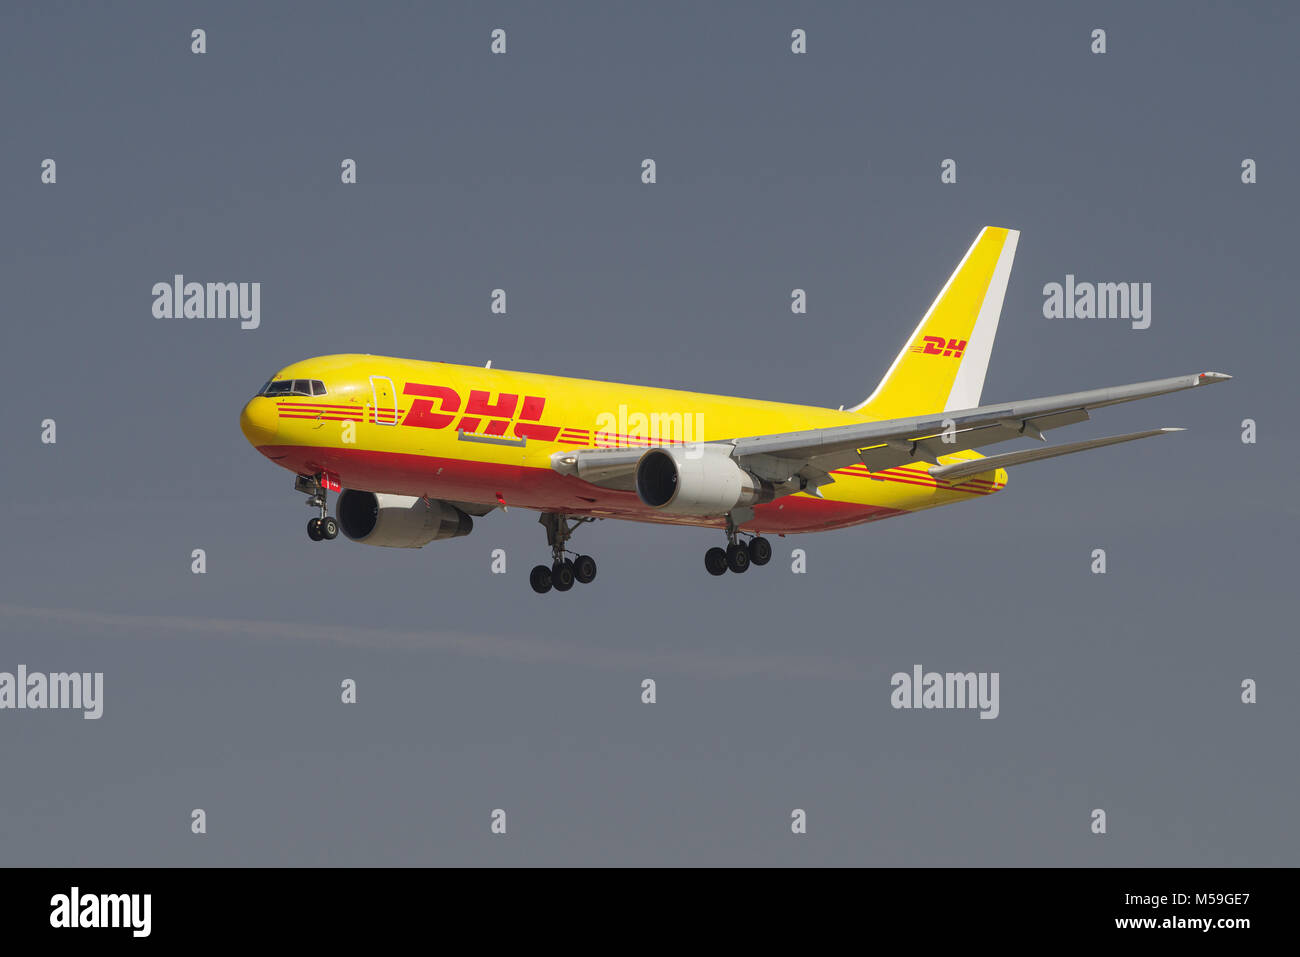 Image of a DHL Boeing 767 shown approaching the Los Angeles International Airport, LAX, for landing. Stock Photo